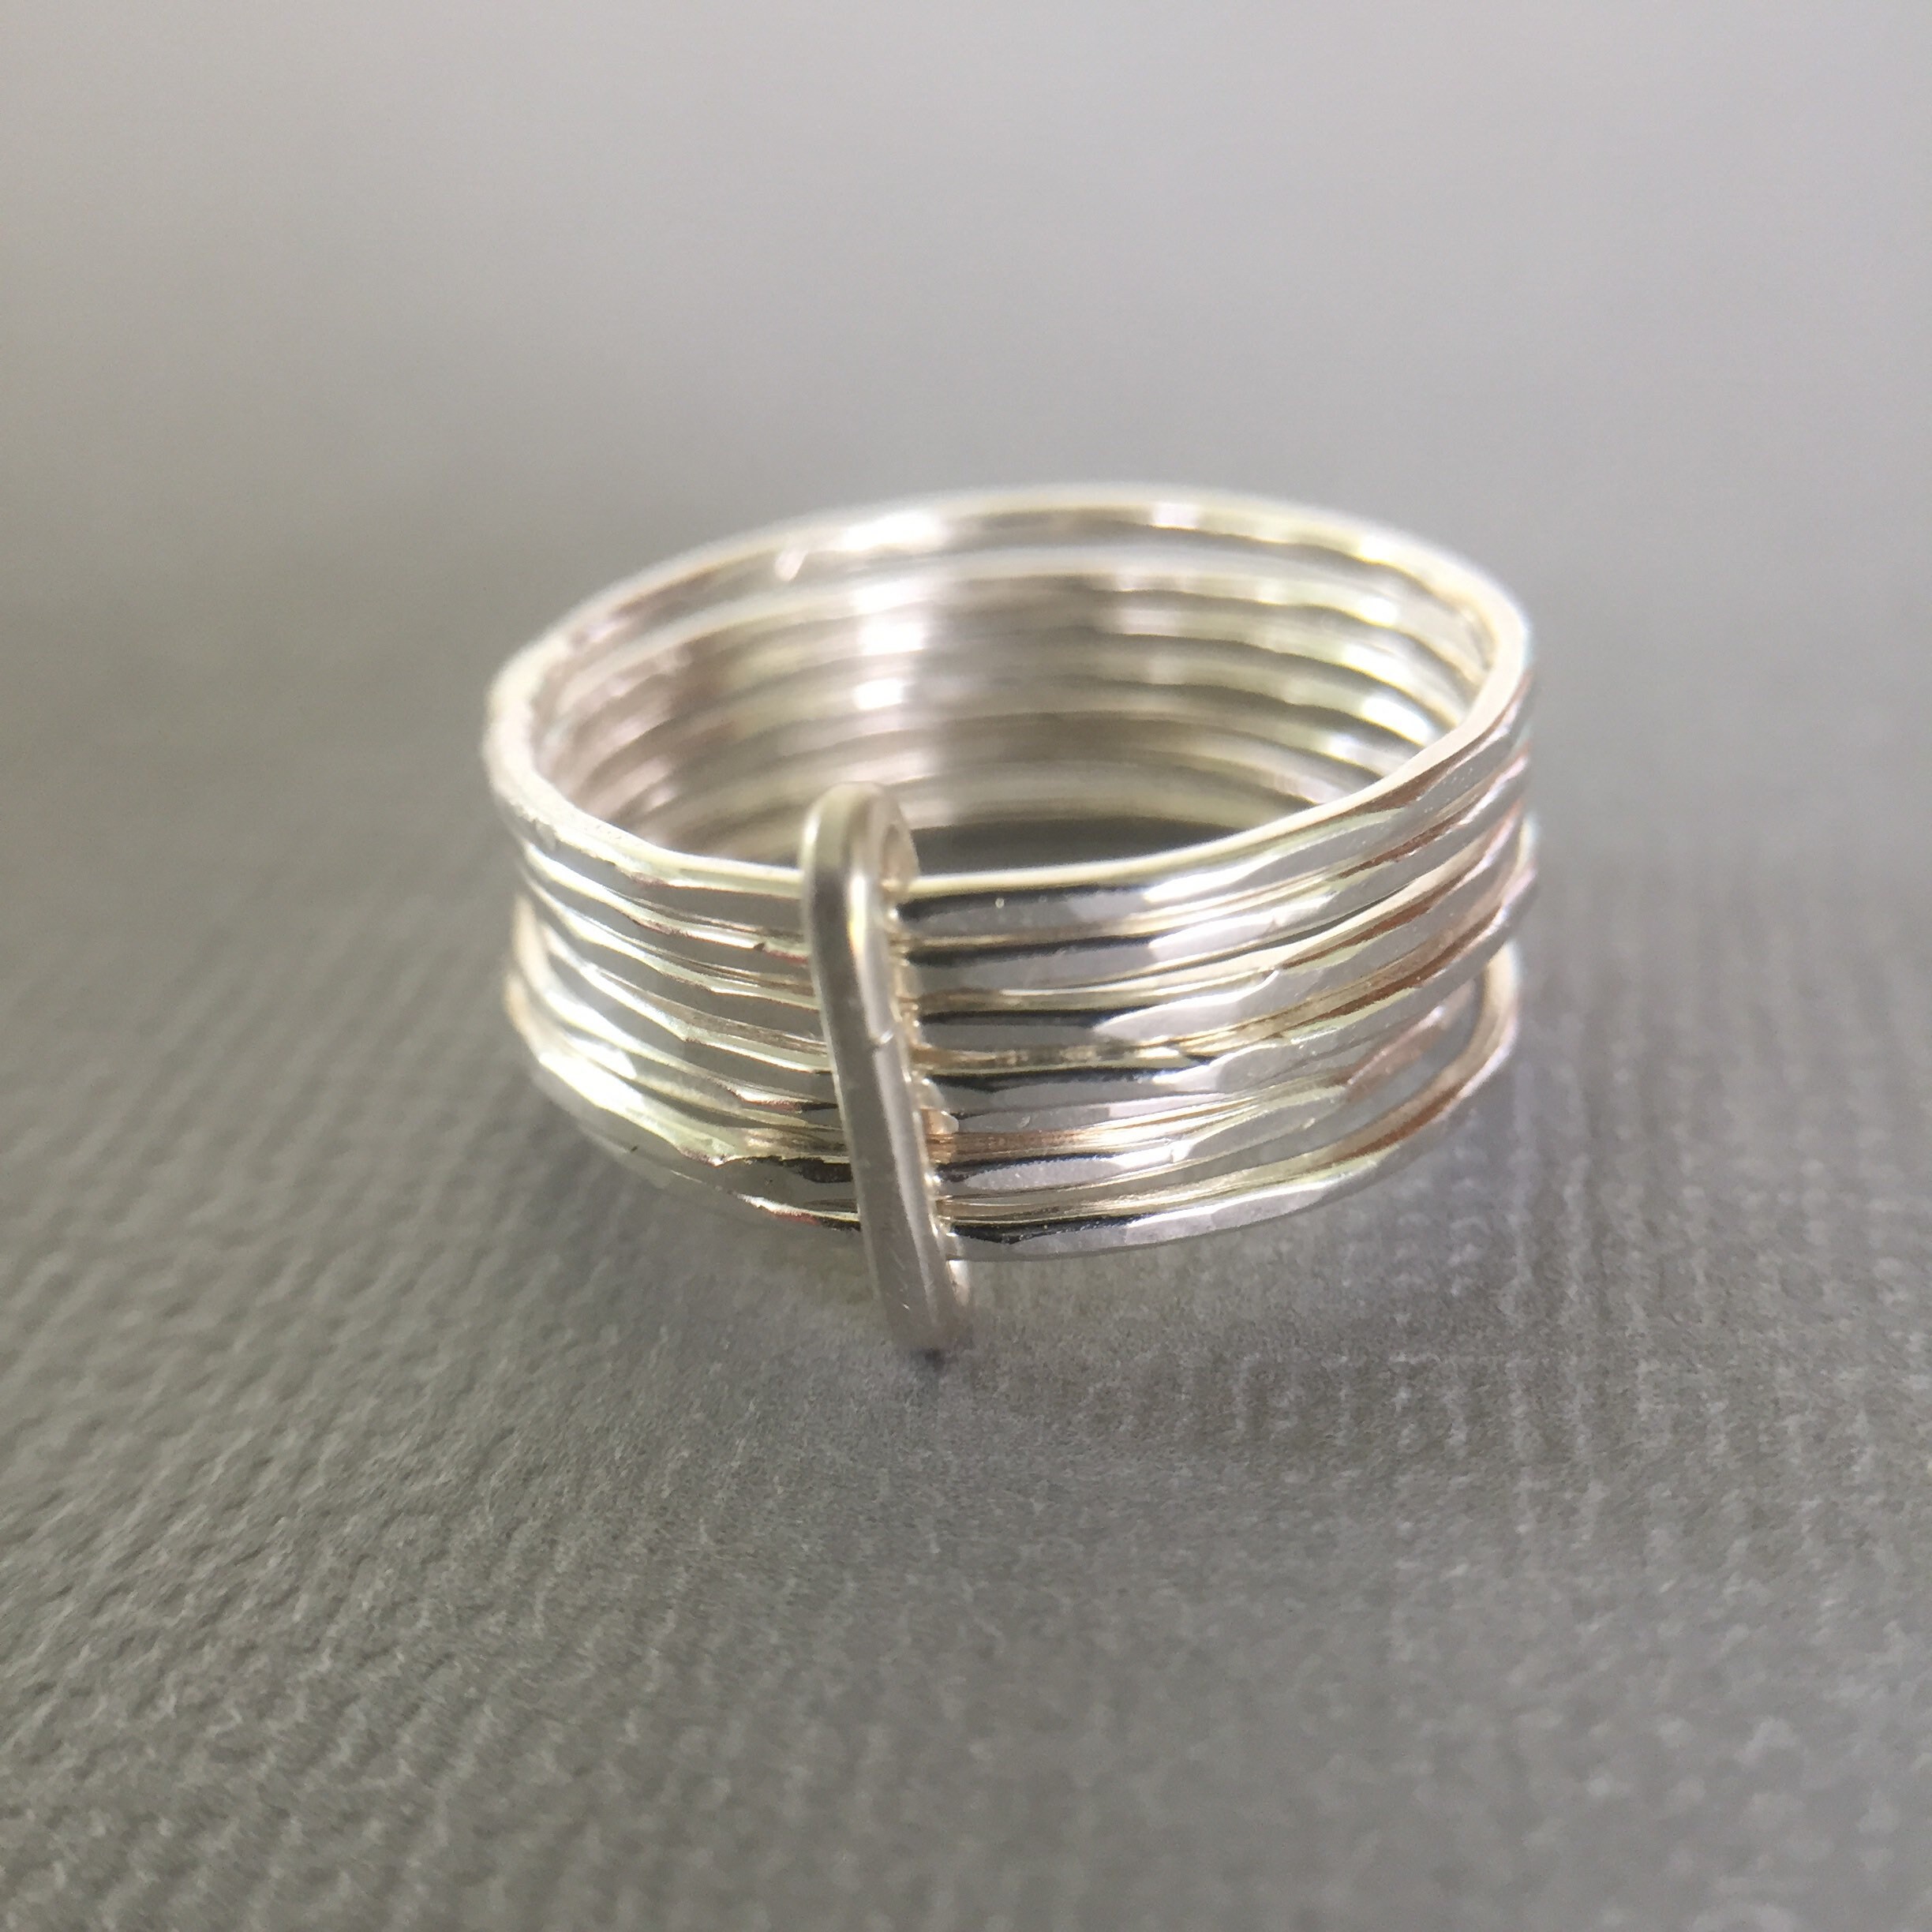 7 Day Ring Stack Ring Sterling Silver Ring Thin Band Ring | Etsy